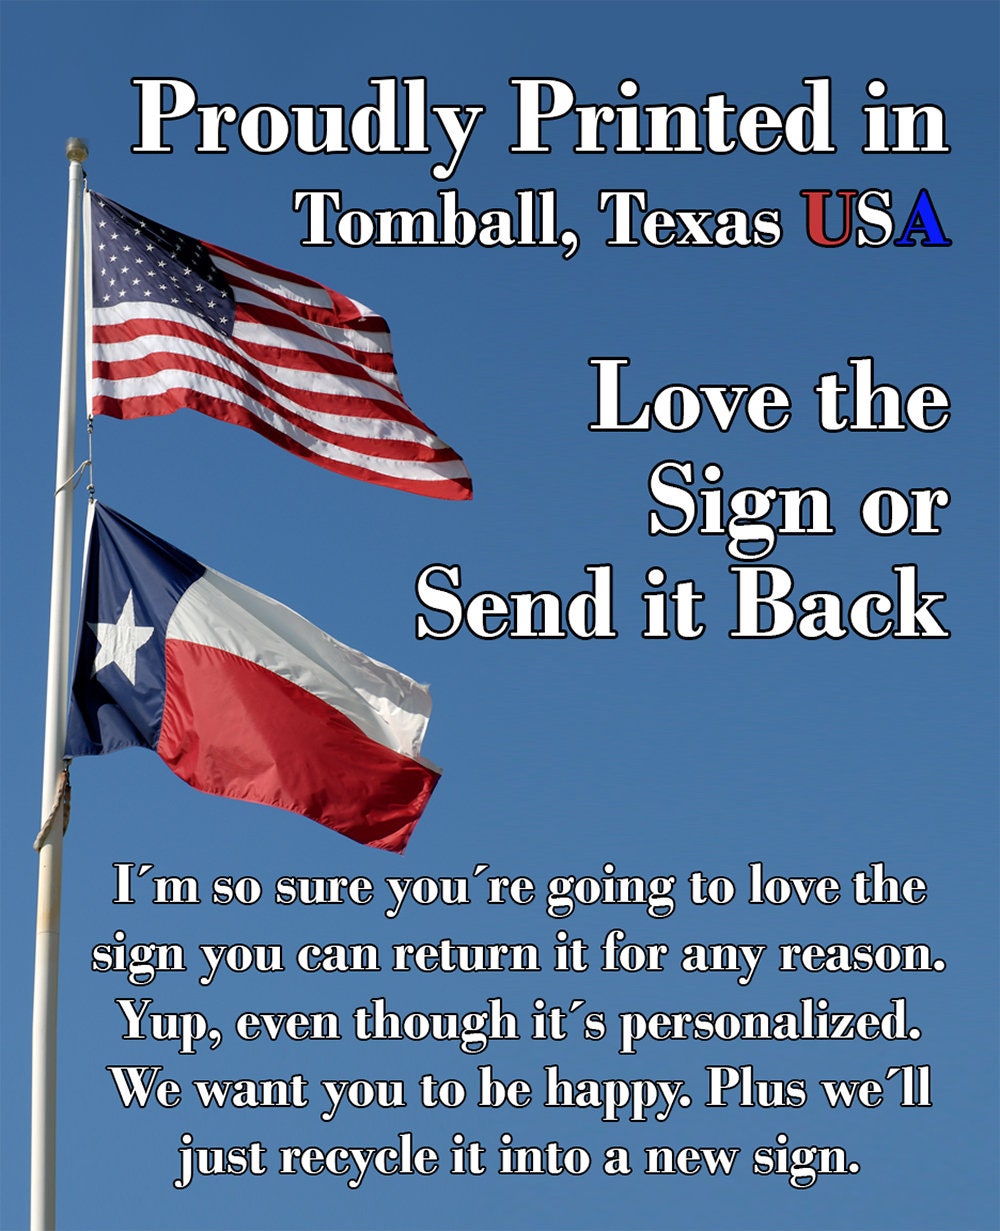 Thou Shall Not Let Penetrate Thy Aura - Metal Sign Lone Star Art 